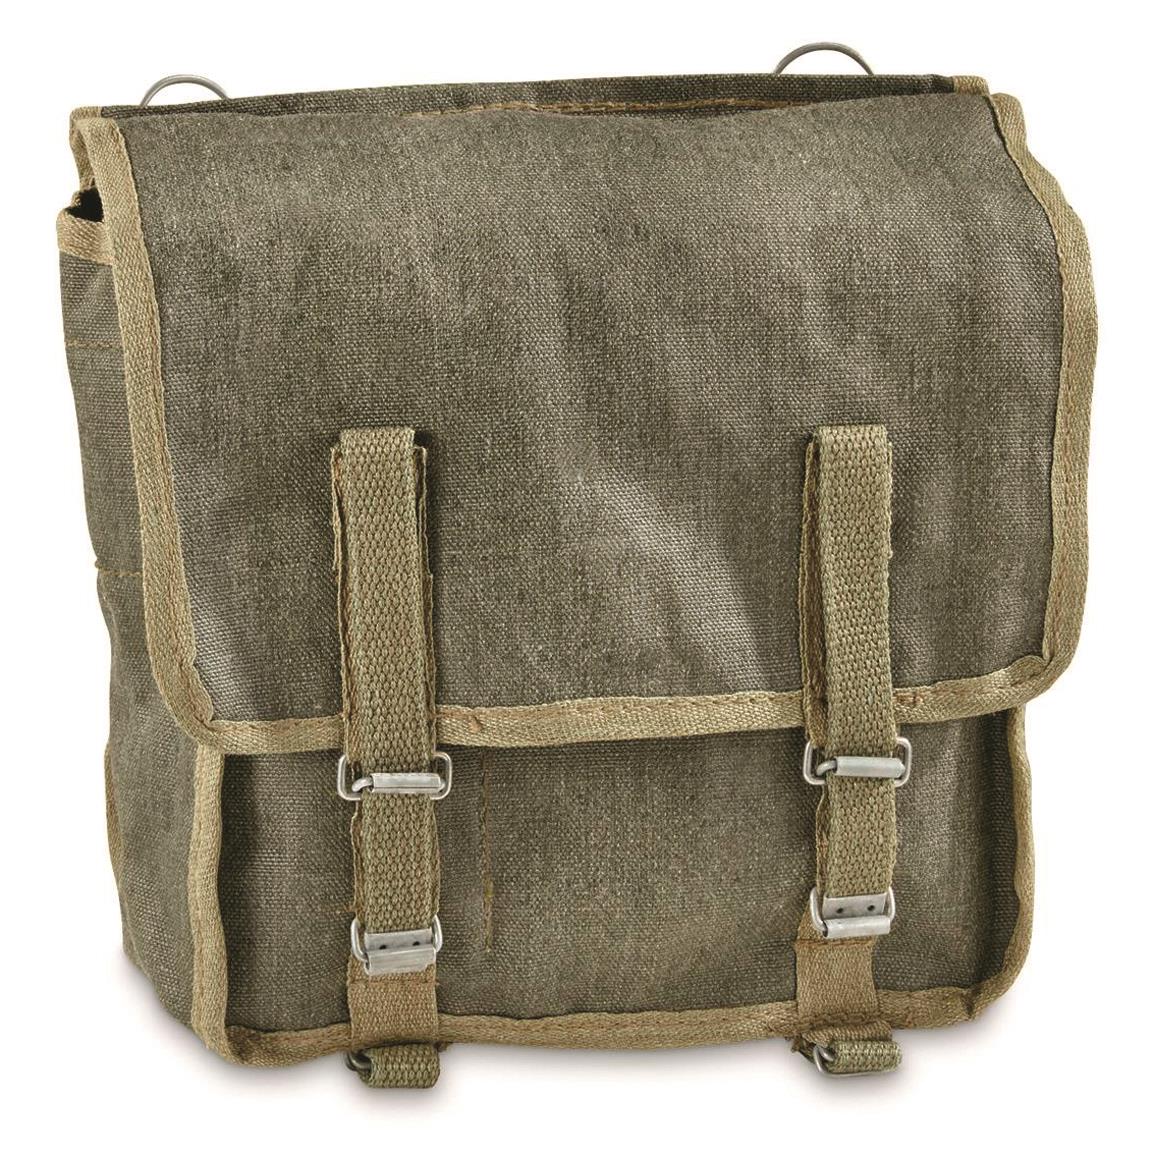 Shop Military Shoulder Bags | IUCN Water